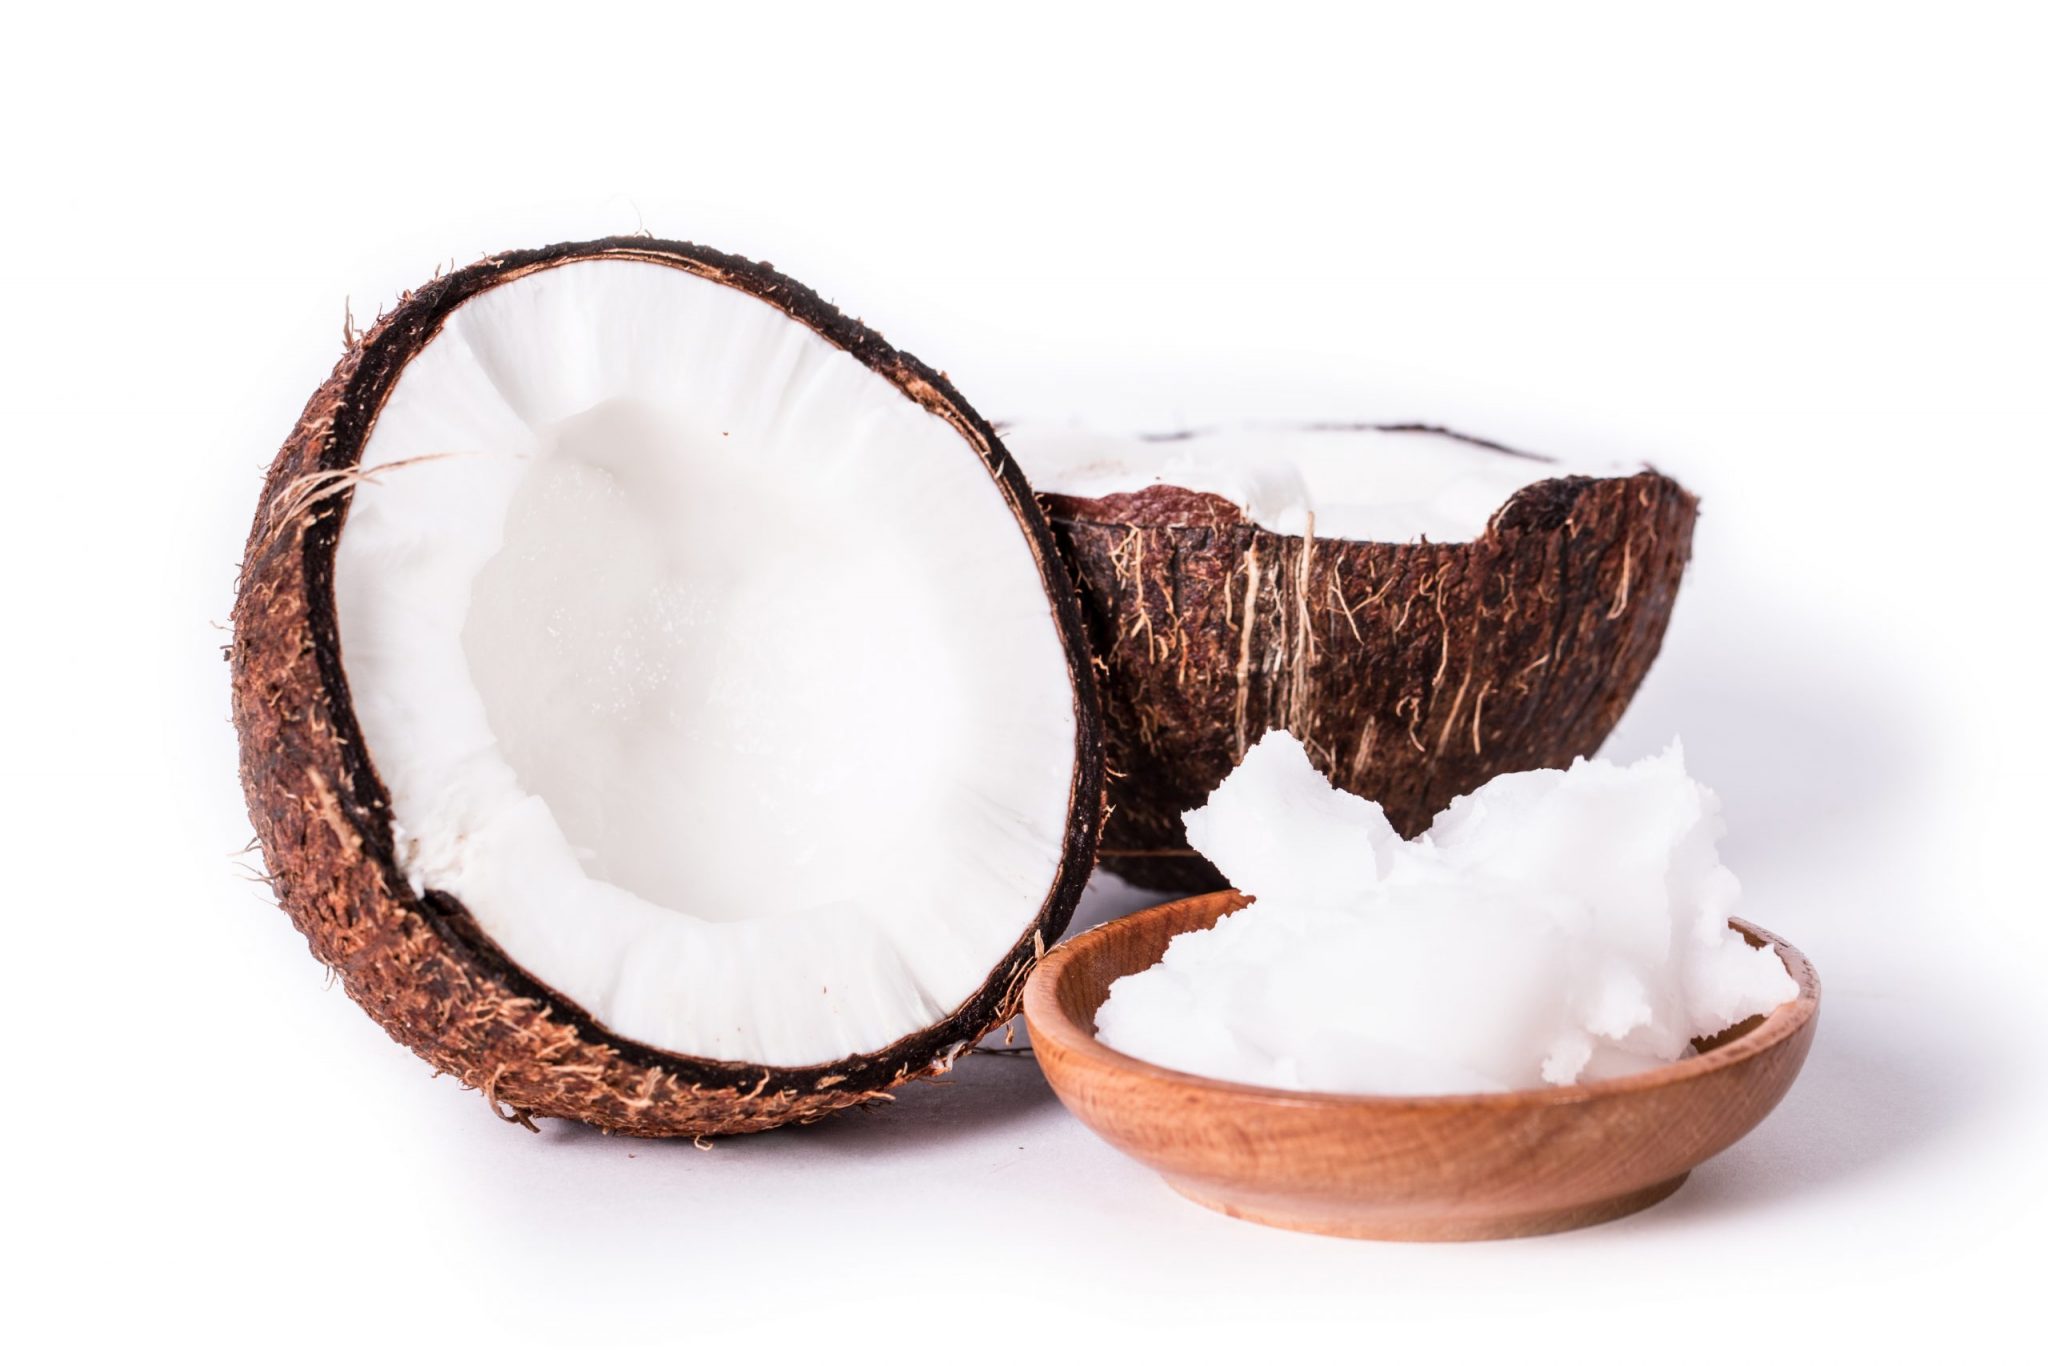 COCONUT OIL FOR REJUVENATION AND HEALING